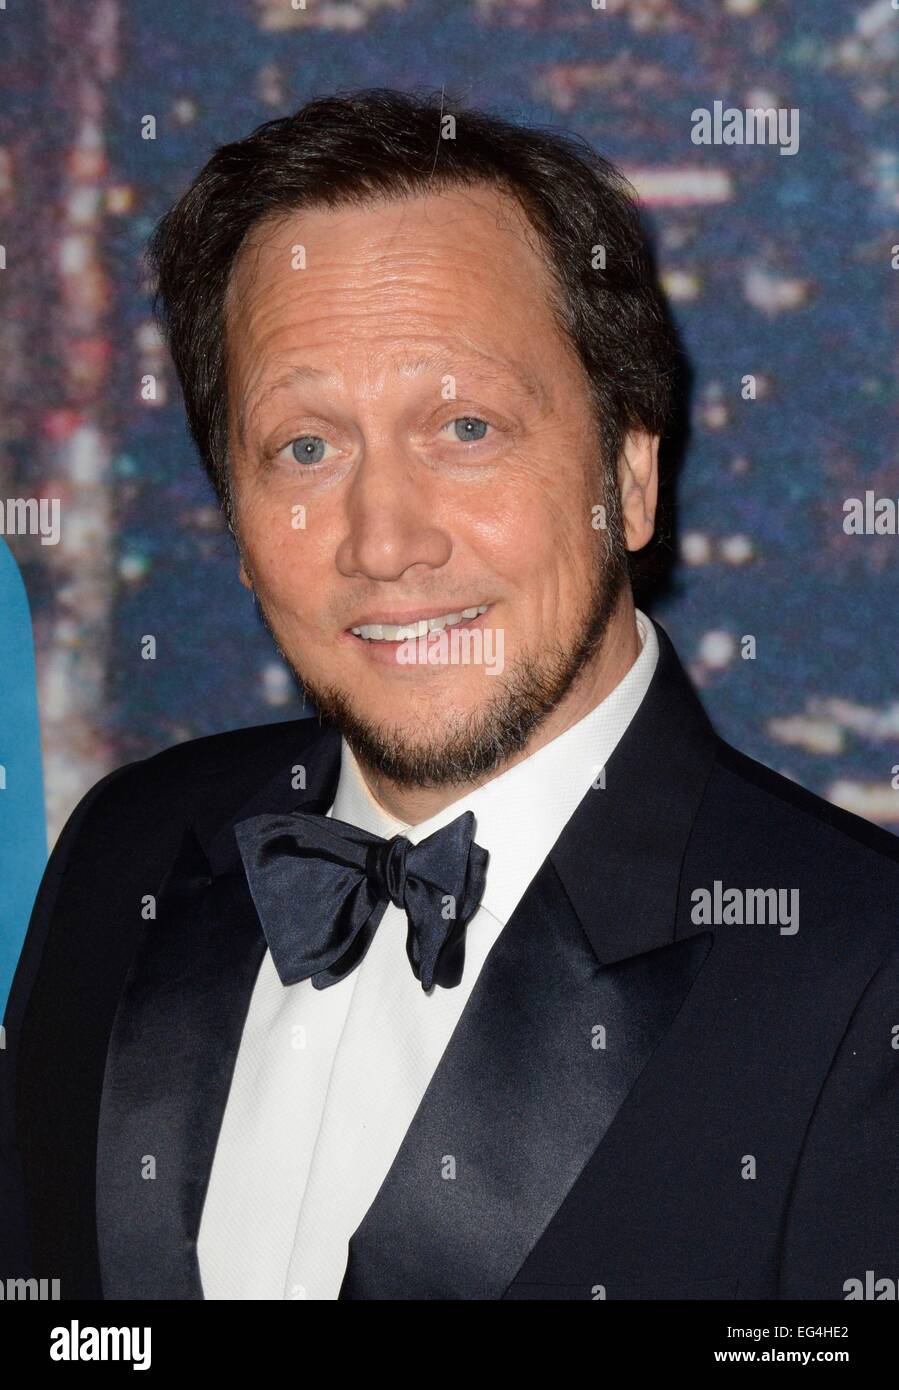 New York, NY, USA. 15th Feb, 2015. Rob Schneider at arrivals for Saturday Night Live SNL 40th Anniversary, Rockefeller Center, New York, NY February 15, 2015. Credit:  Derek Storm/Everett Collection/Alamy Live News Stock Photo